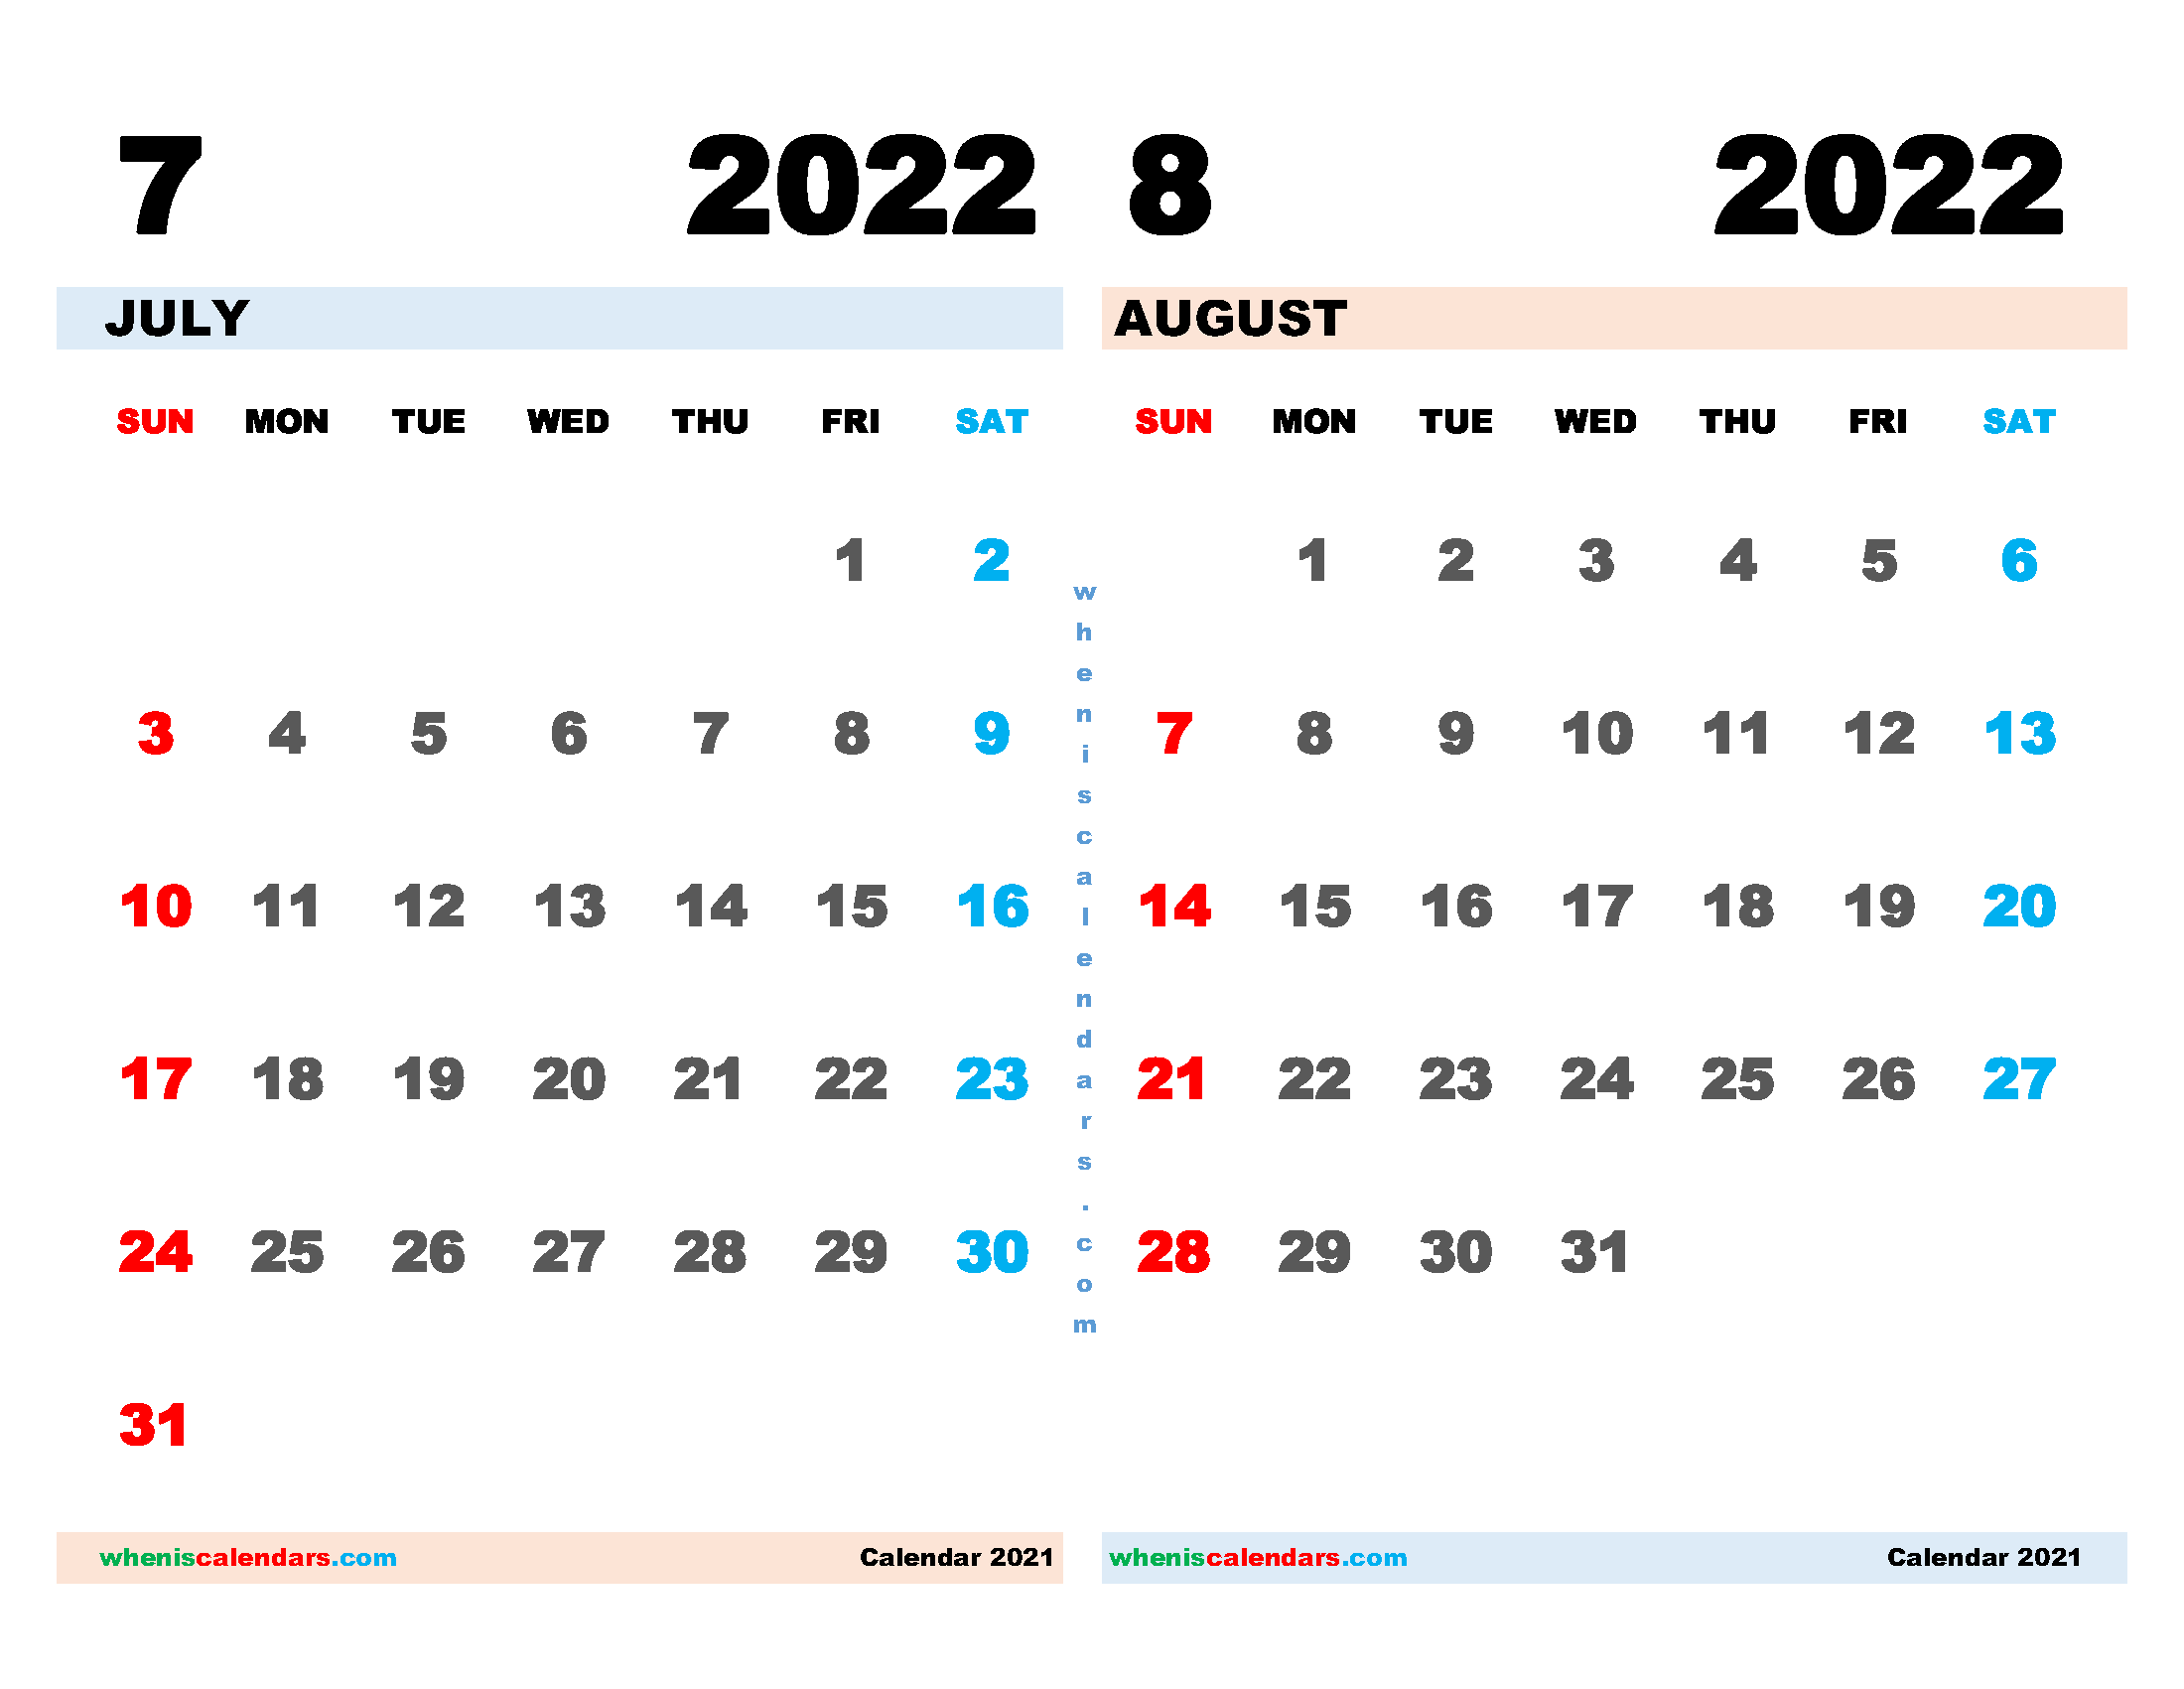 Download Free July and August 2022 Calendar Printable as PDF document and high resolution PNG Image file format (landcape)